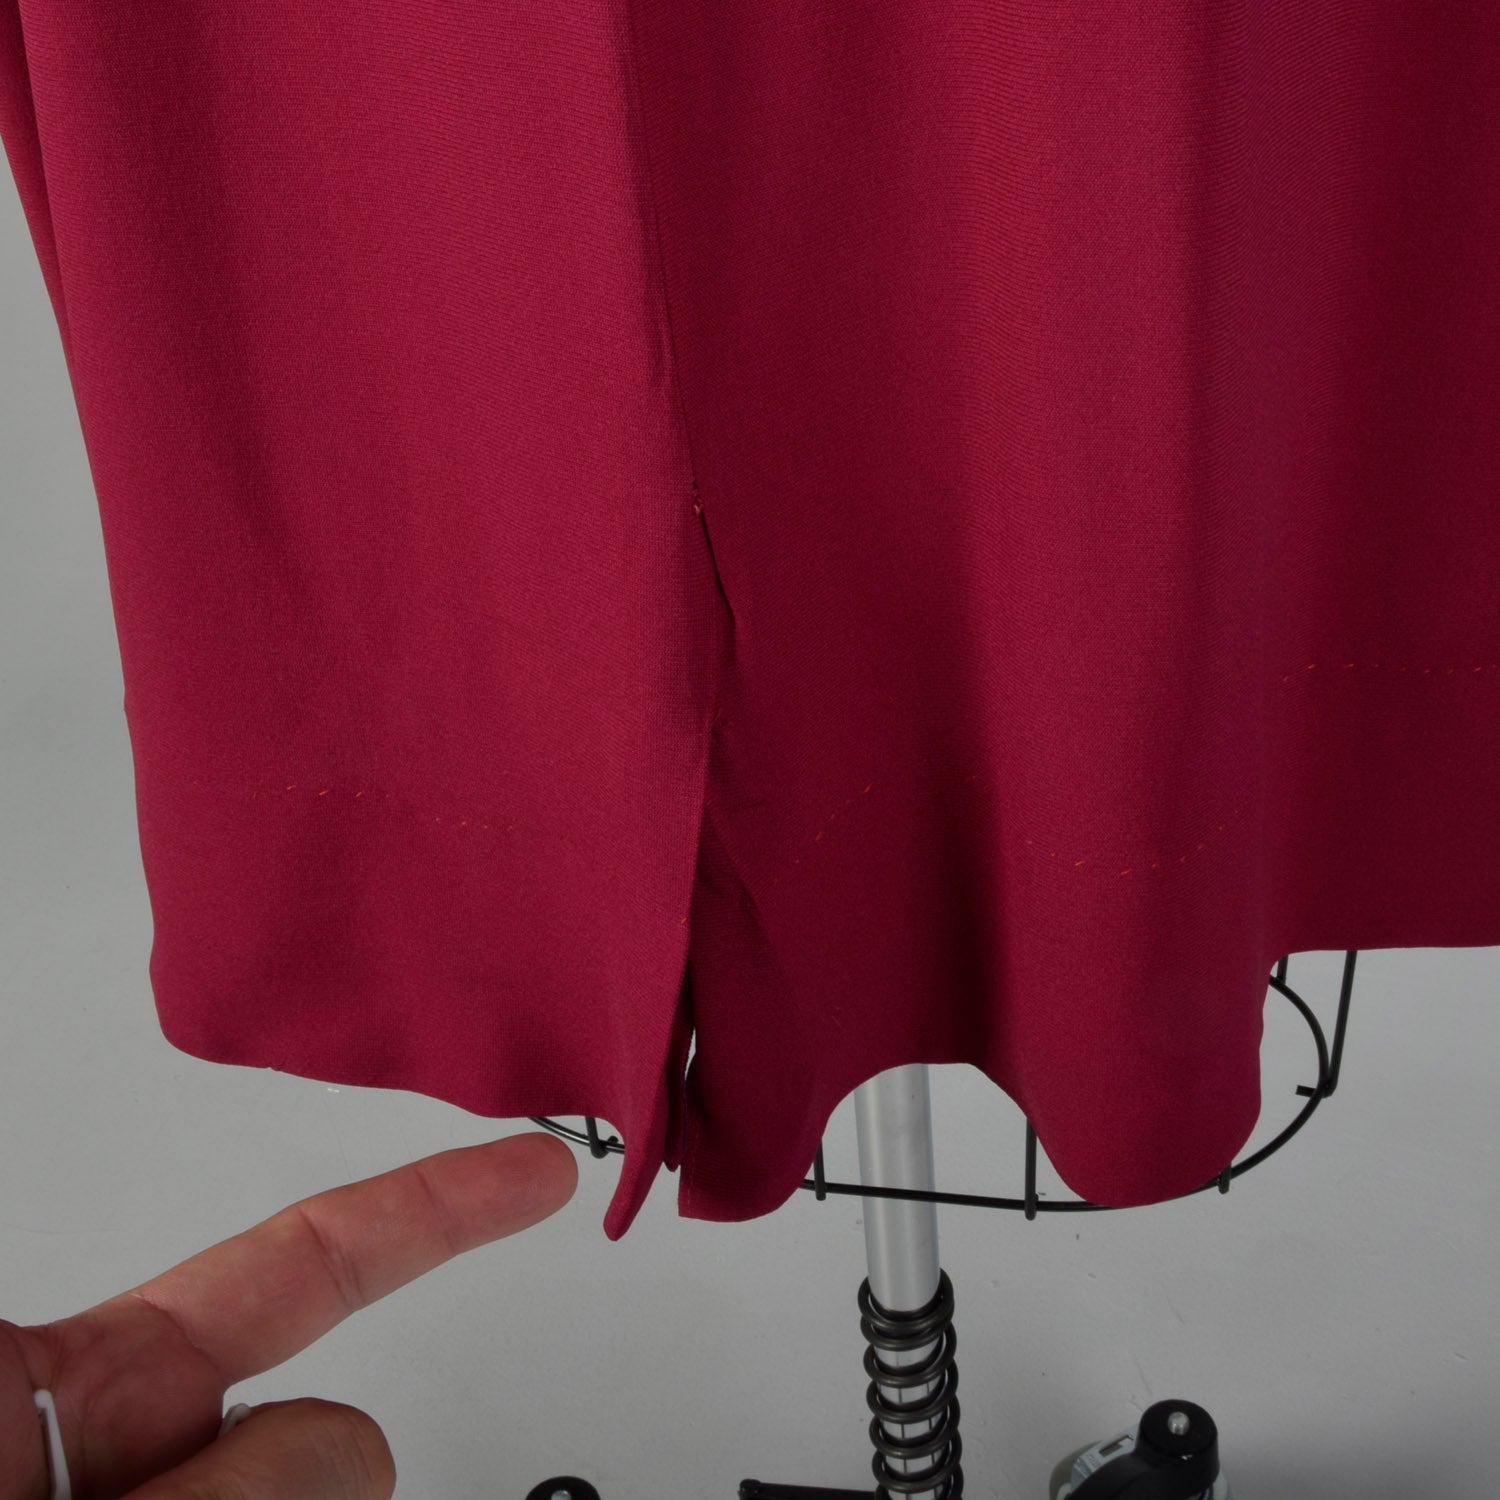 XL 1950s Magenta Dress with Piping Detail